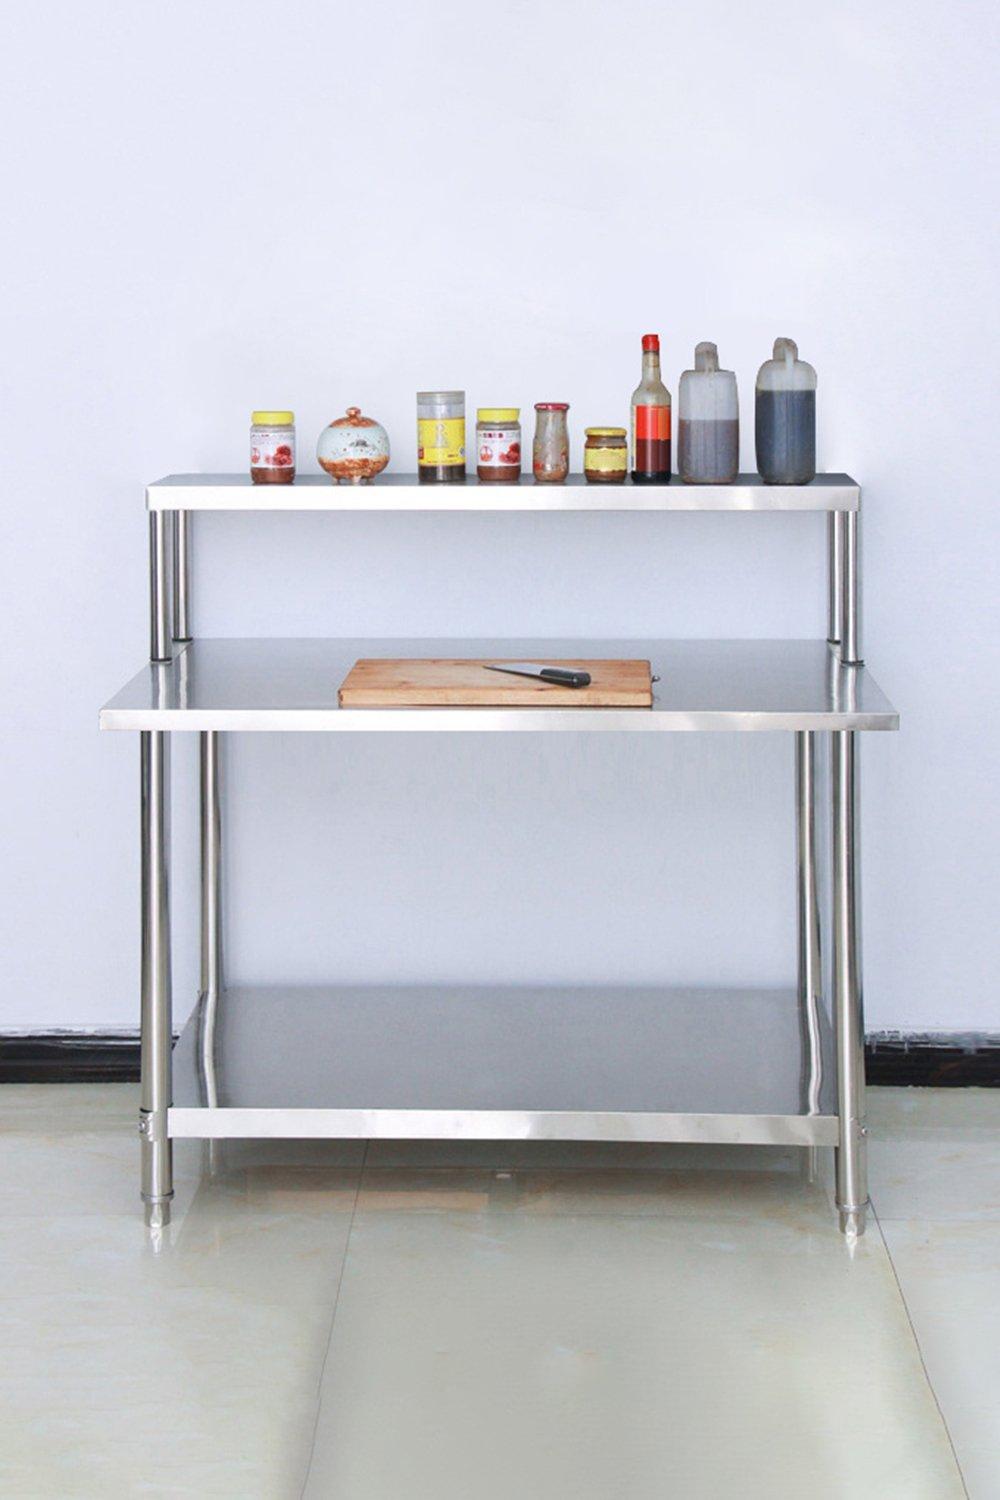 2 Pcs Stainless Steel Kitchen Prep Work Table with Overshelf Worktop Bench